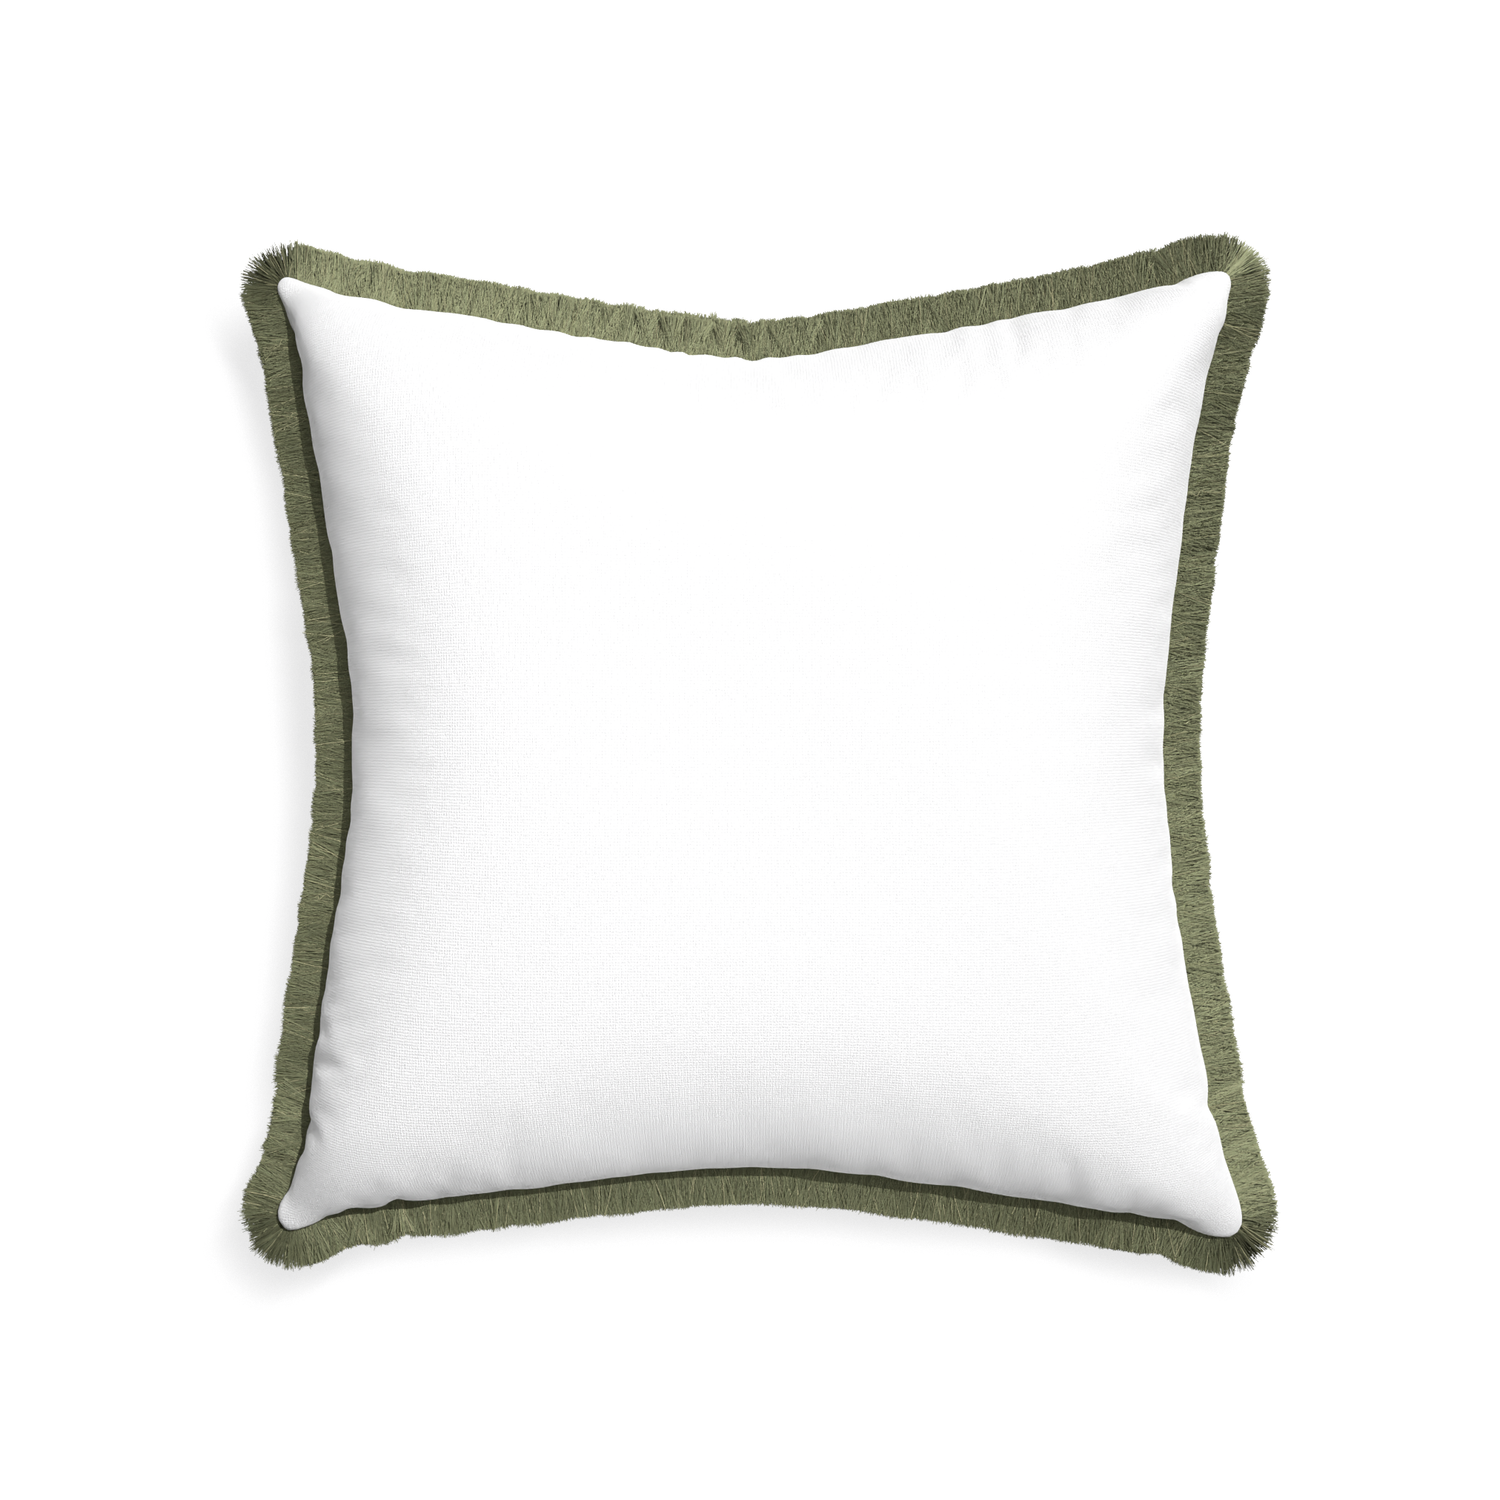 22-square snow custom white cottonpillow with sage fringe on white background